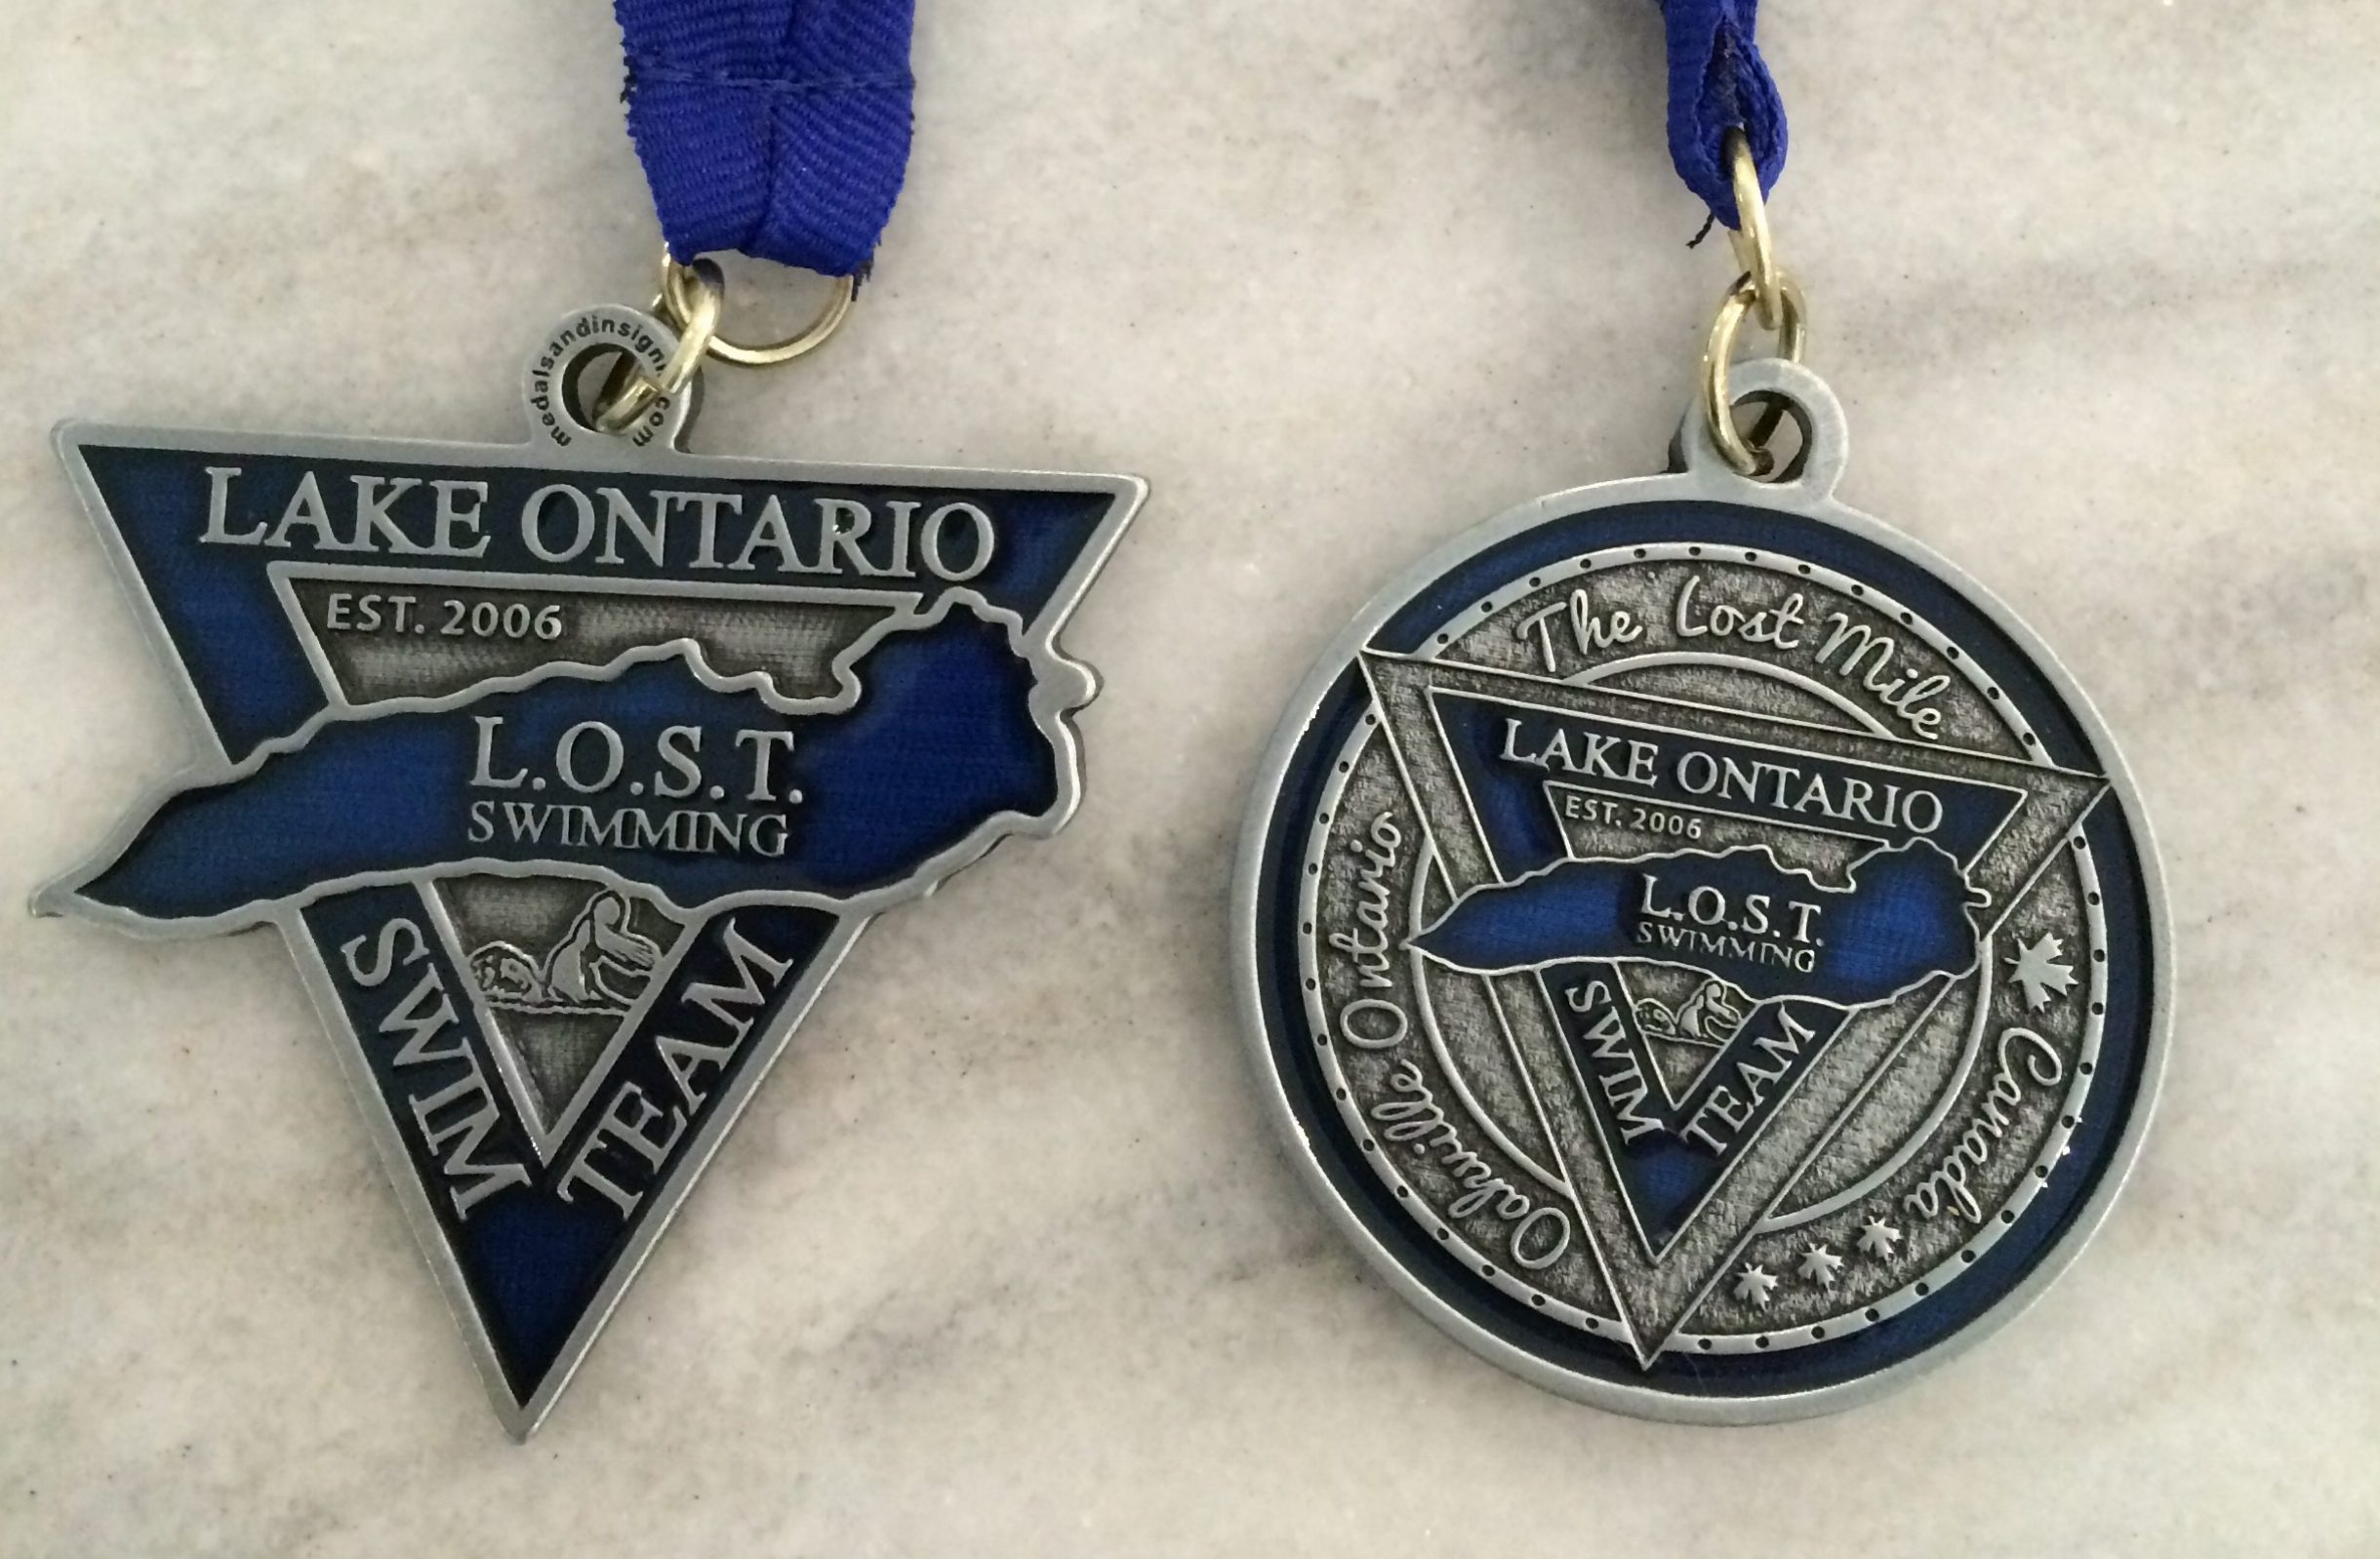 LOST Race and LOST Mile medals!